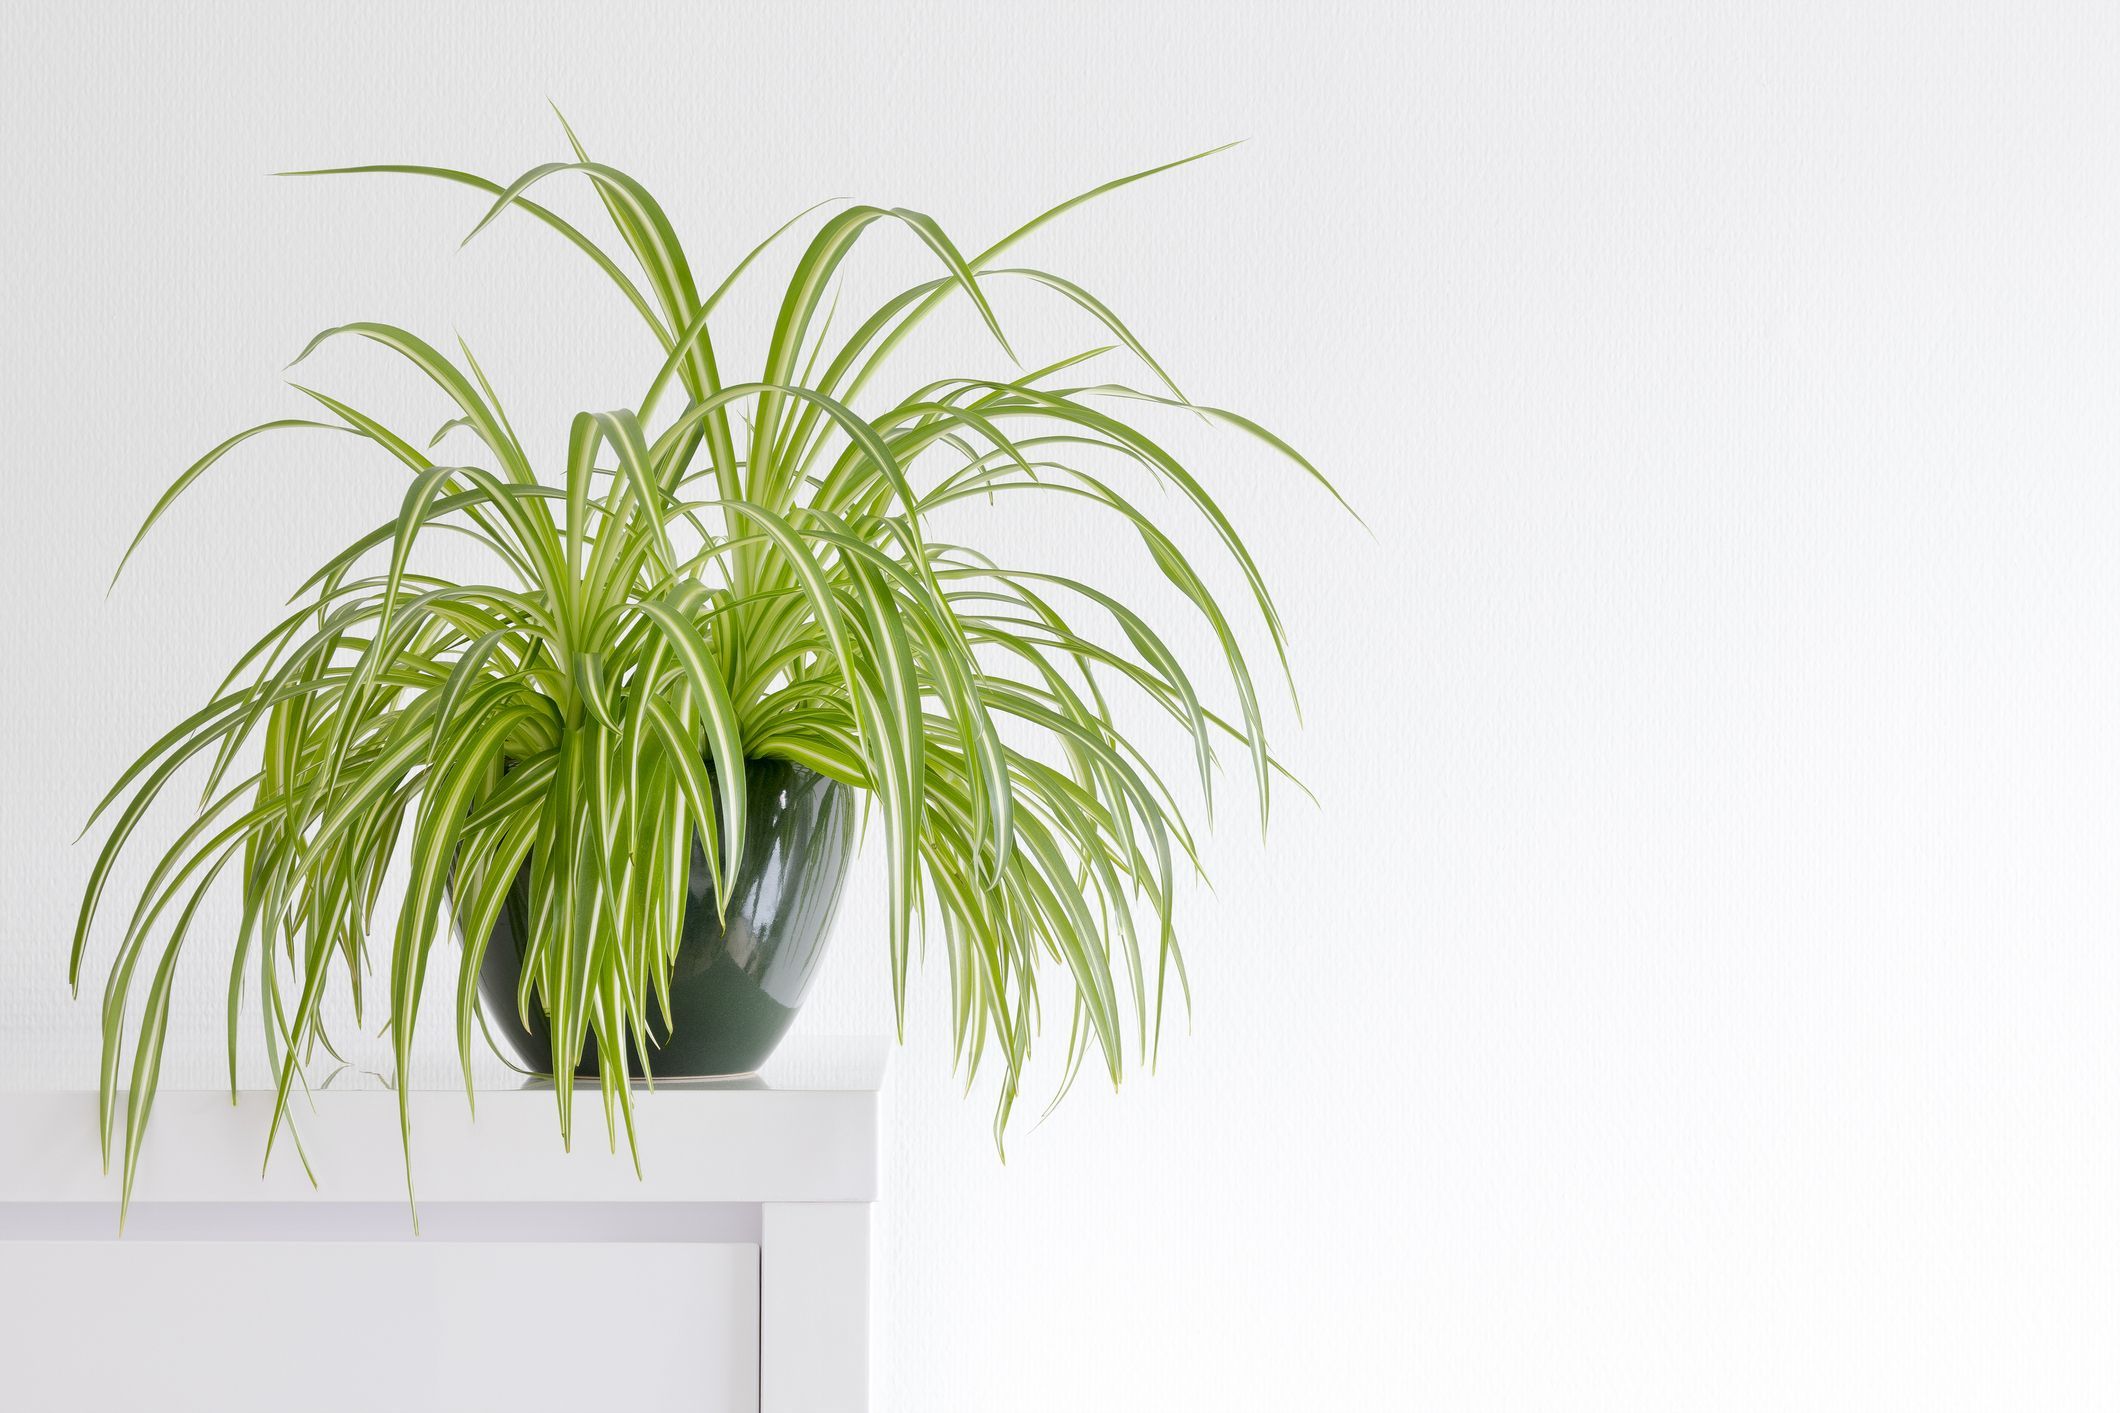 are spider plants toxic to cats and dogs